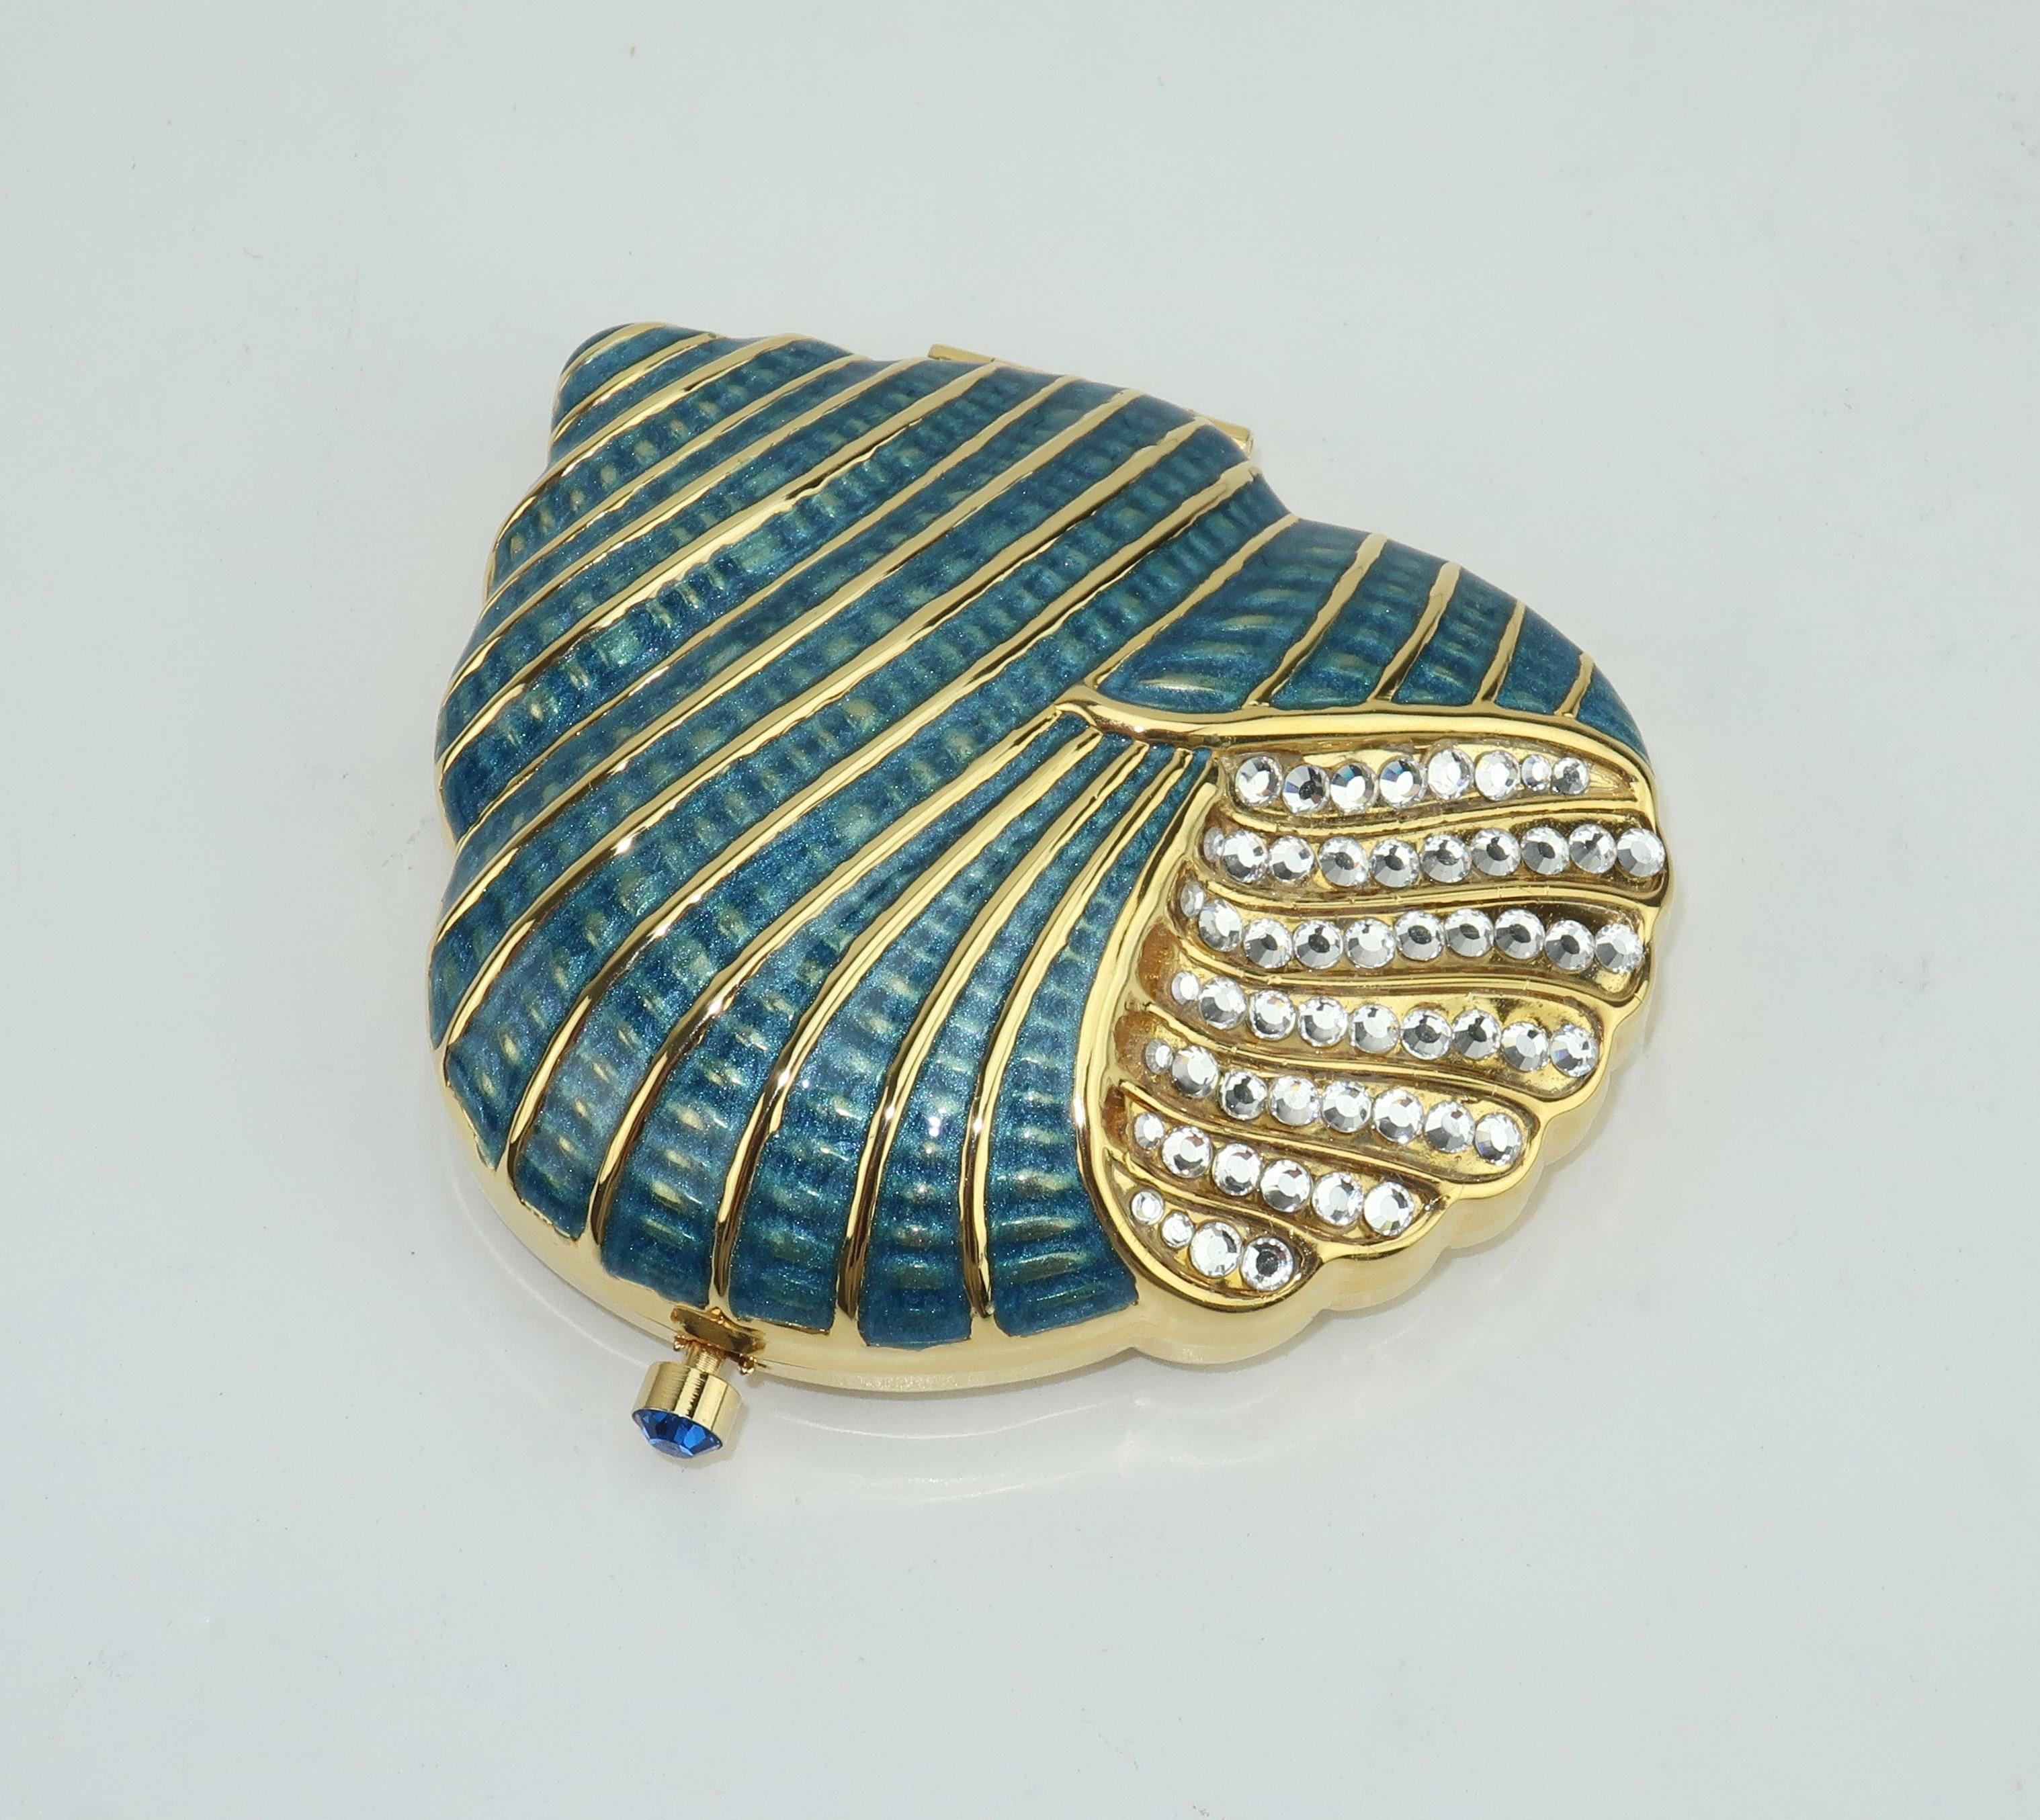 Estee Lauder has been producing limited edition compacts since the 1950's.  This beautiful shell shaped gold tone compact is bedazzled with pave crystals and sea blue enameling.  The rhinestone push button closure opens to reveal a mirror and powder